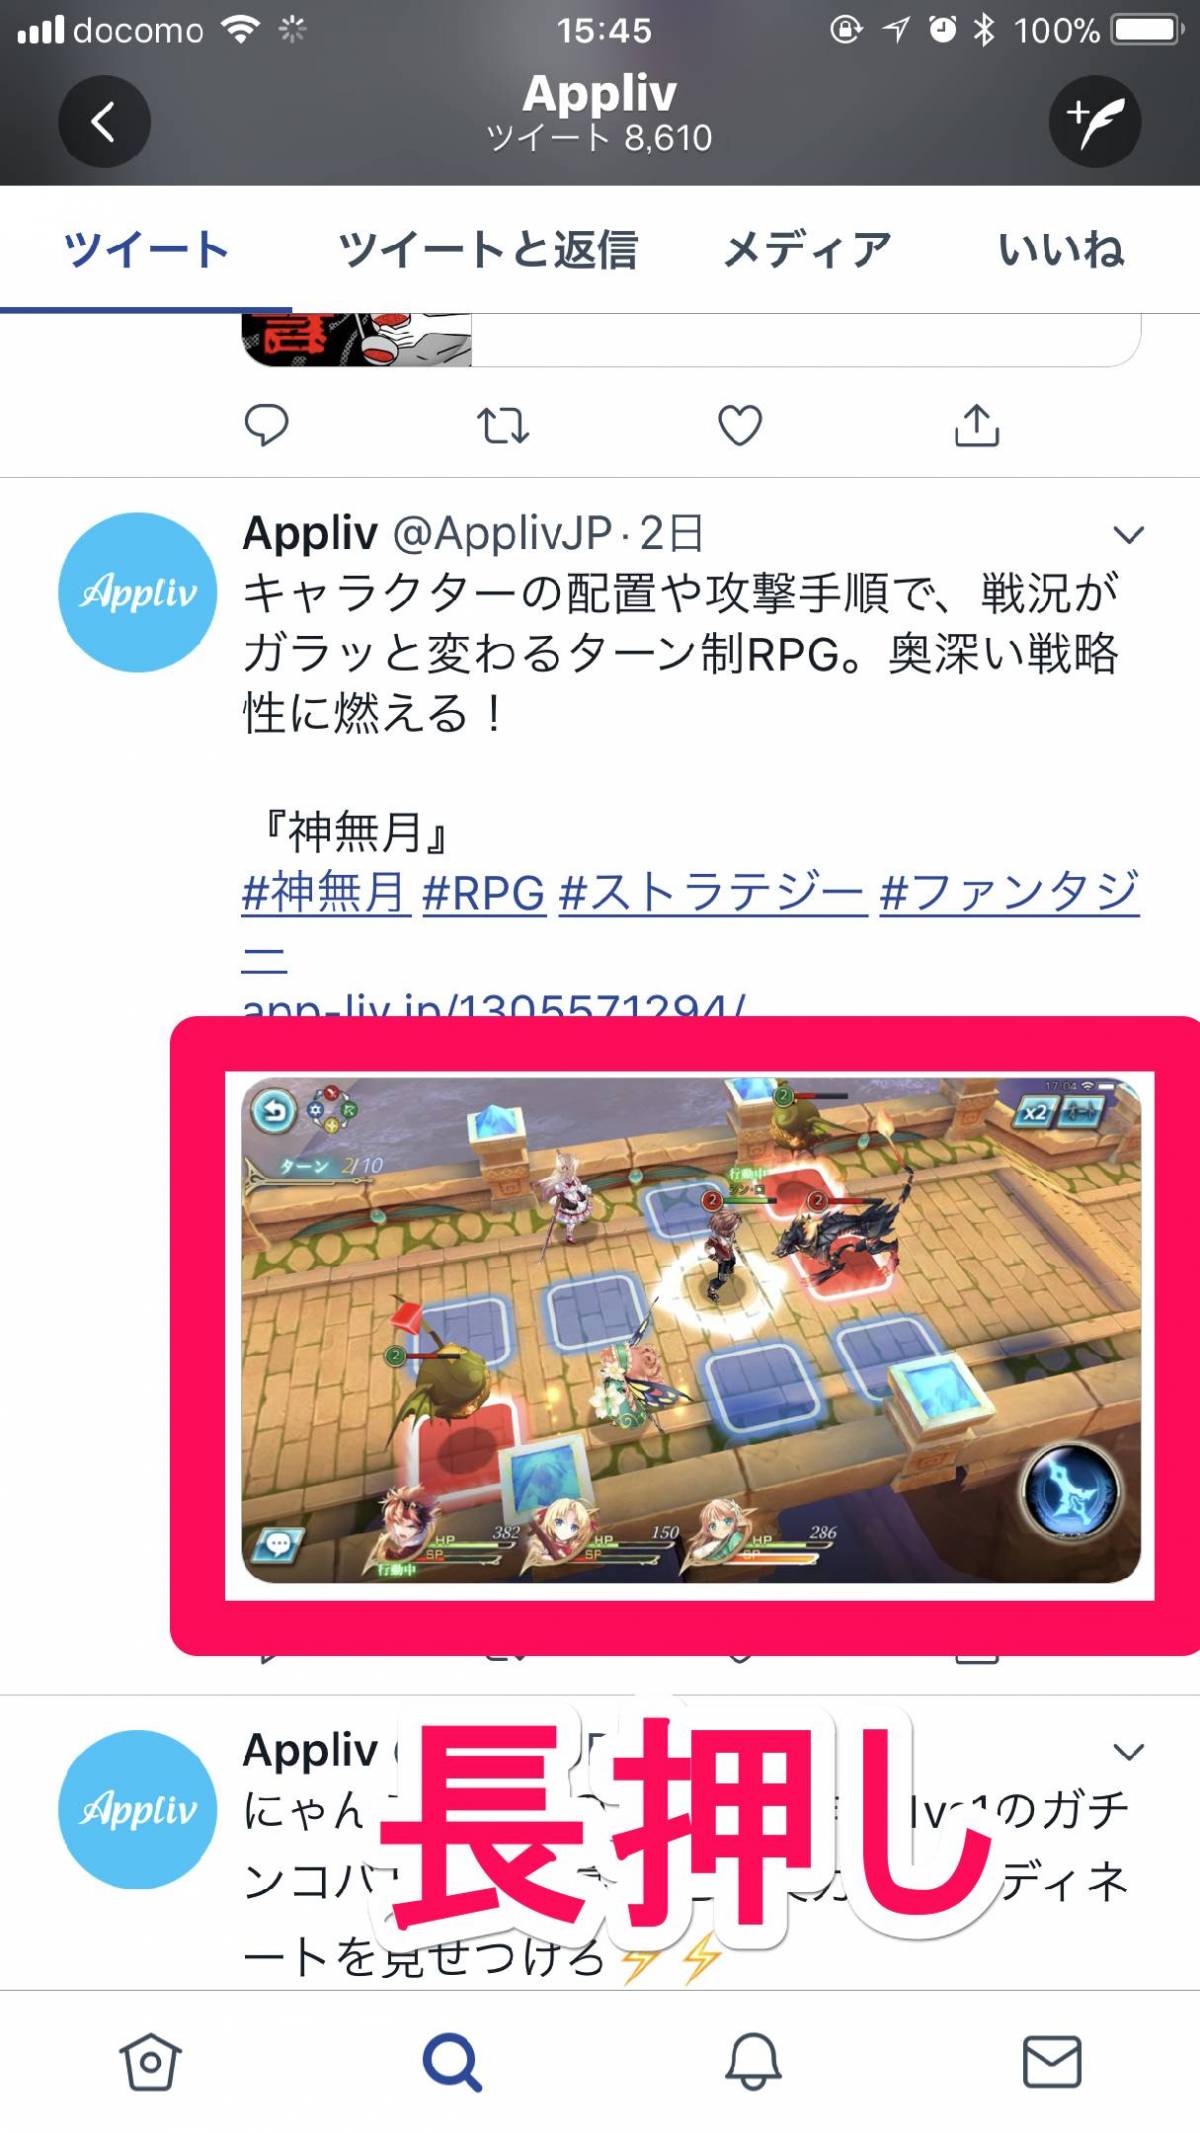 Twitter 画像の保存方法 複数枚を一括dlする手段も Iphone Android Pc Appliv Topics